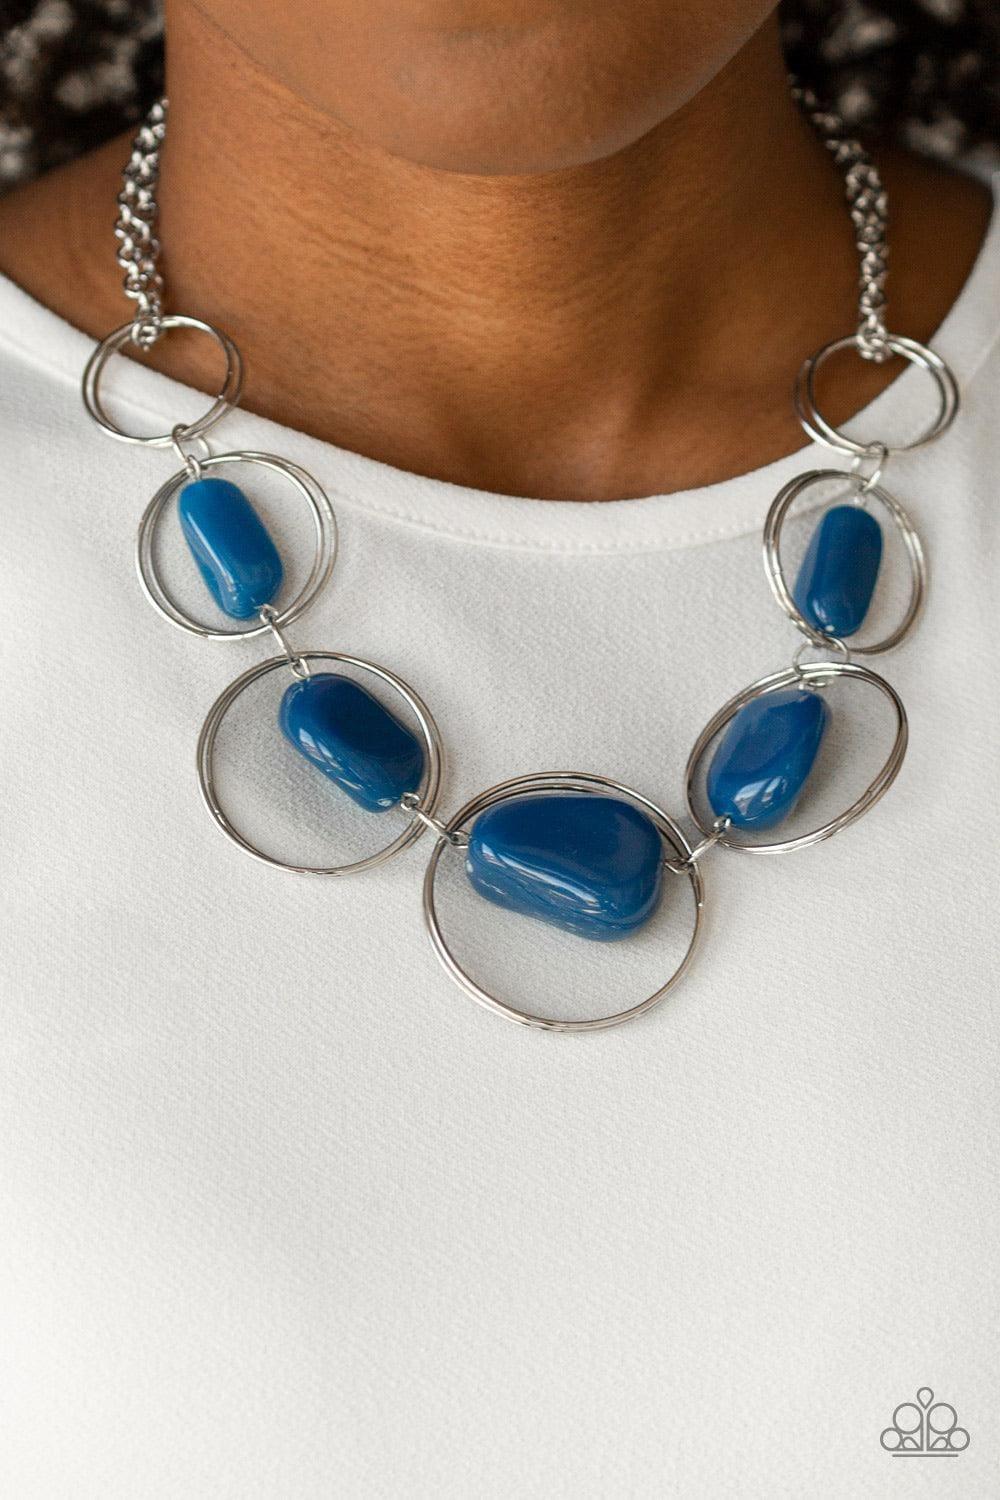 Paparazzi Accessories - Travel Log - Blue Necklace - Bling by JessieK